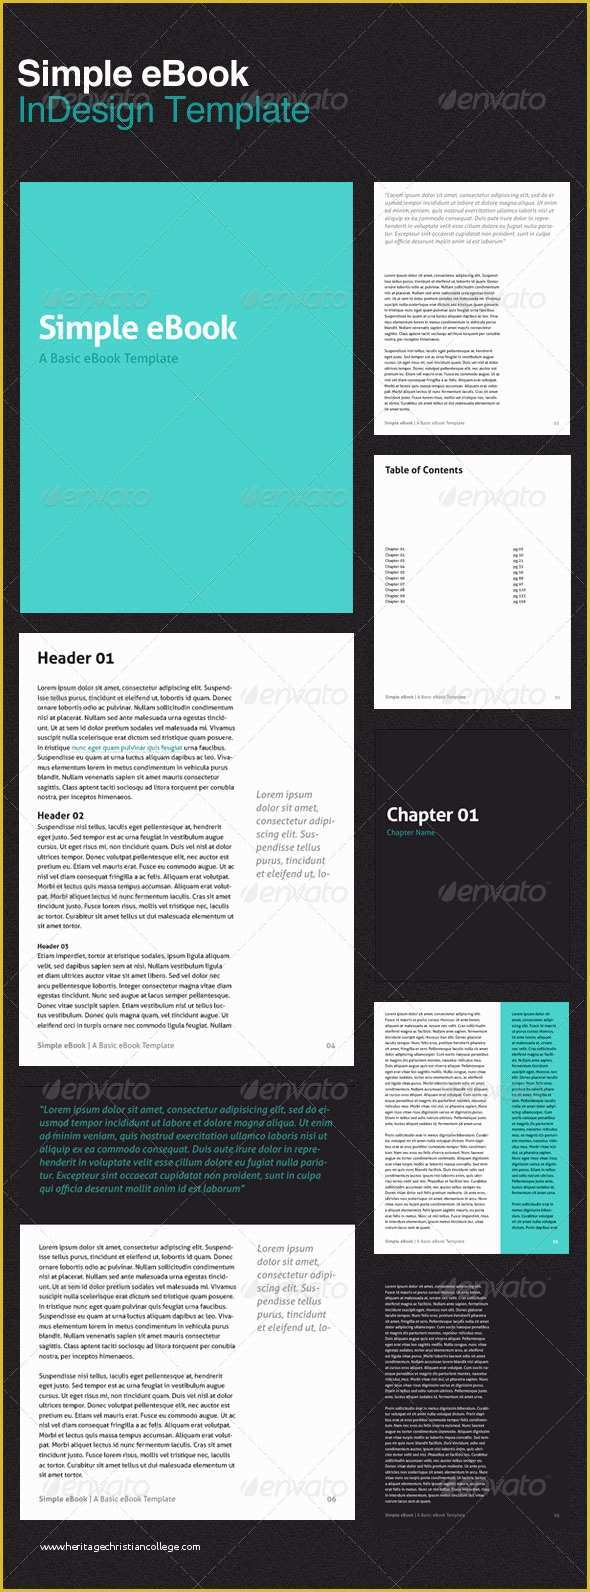 Indesign Ebook Template Free Download Of Simple Ebook Template